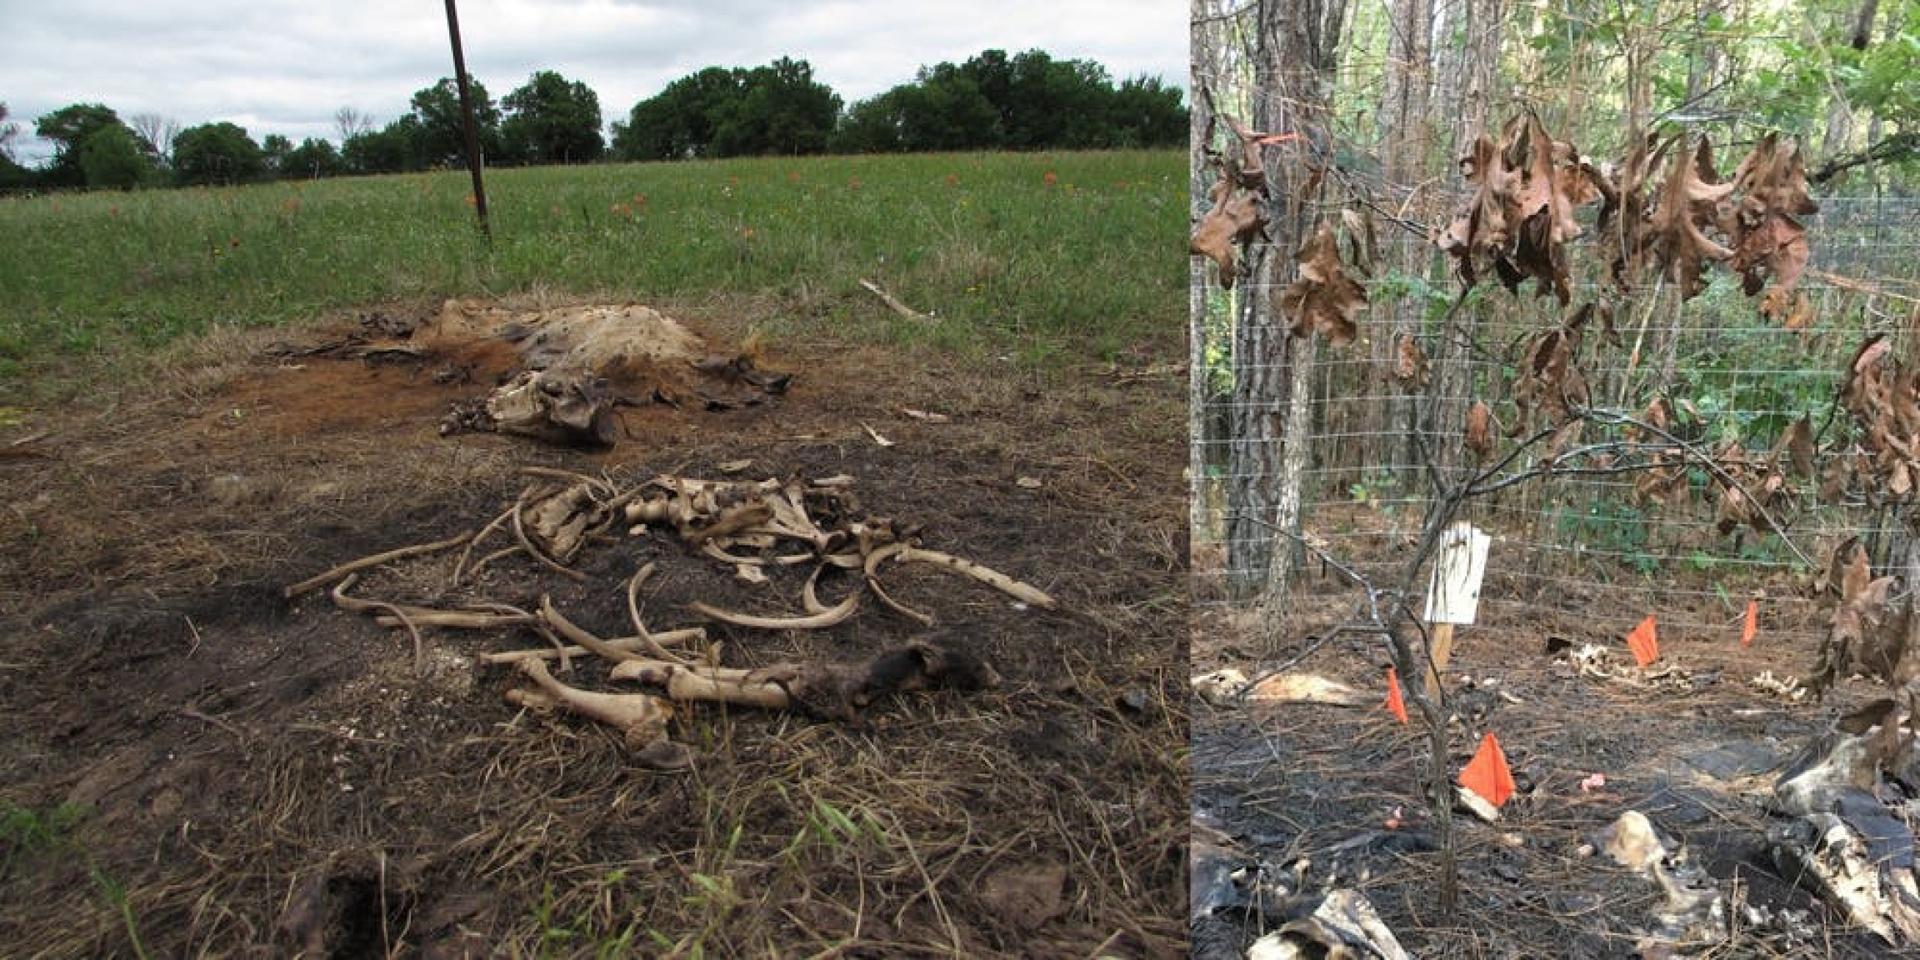 Only bones and fur remained a few weeks after a simulated MME (left). Chemicals leached into the soil during decomposition create a "cadaver island," killing plants and trees (right).